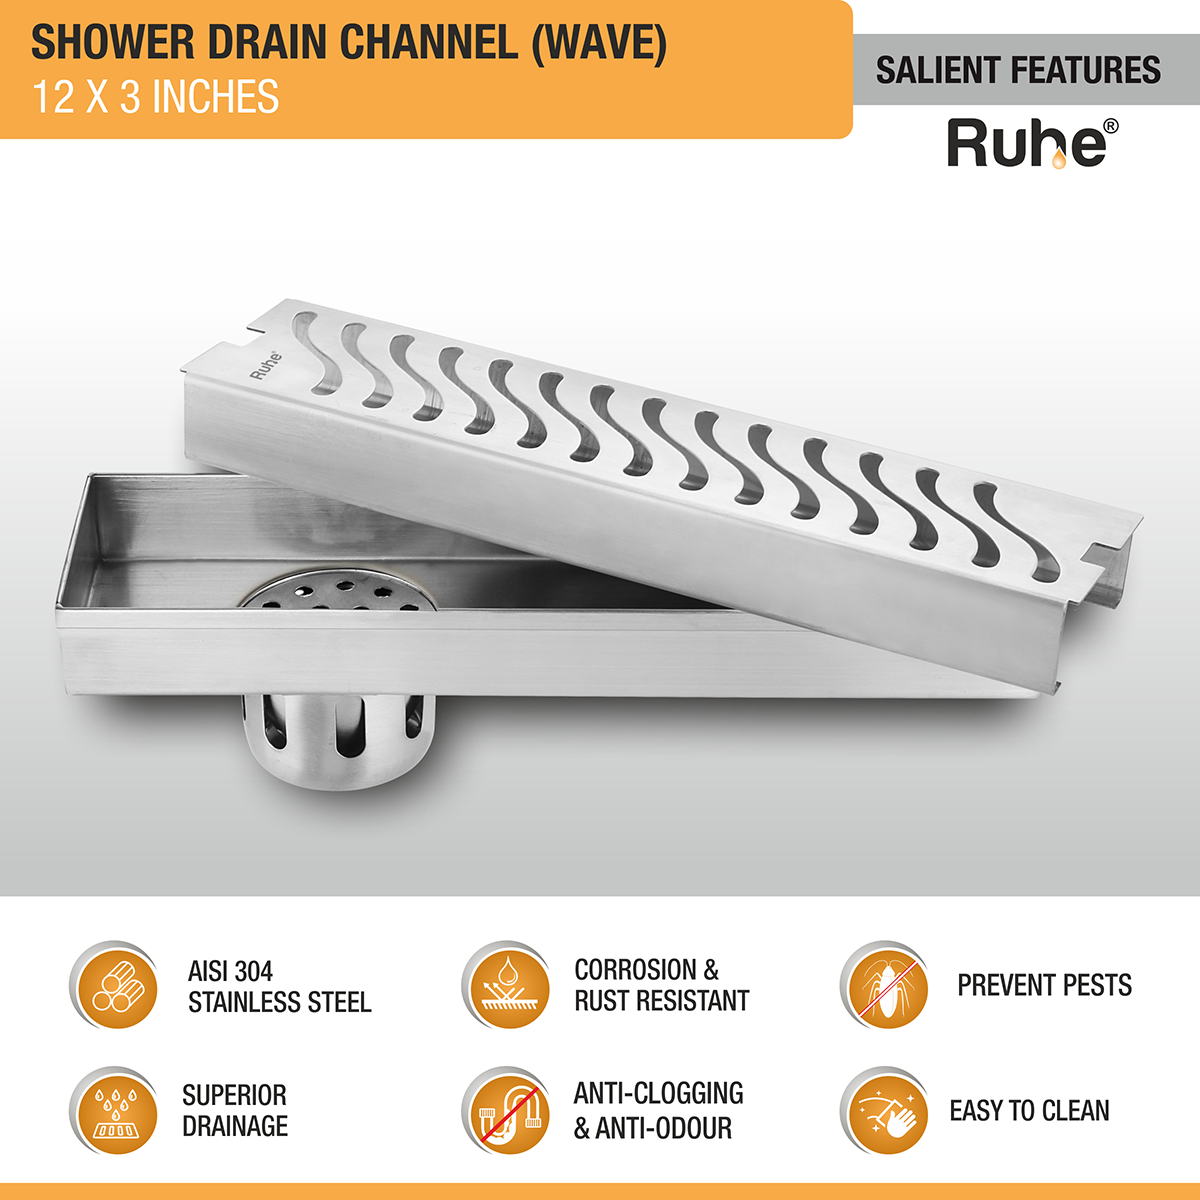 Wave Shower Drain Channel (12 X 3 Inches) with Cockroach Trap (304 Grade) features